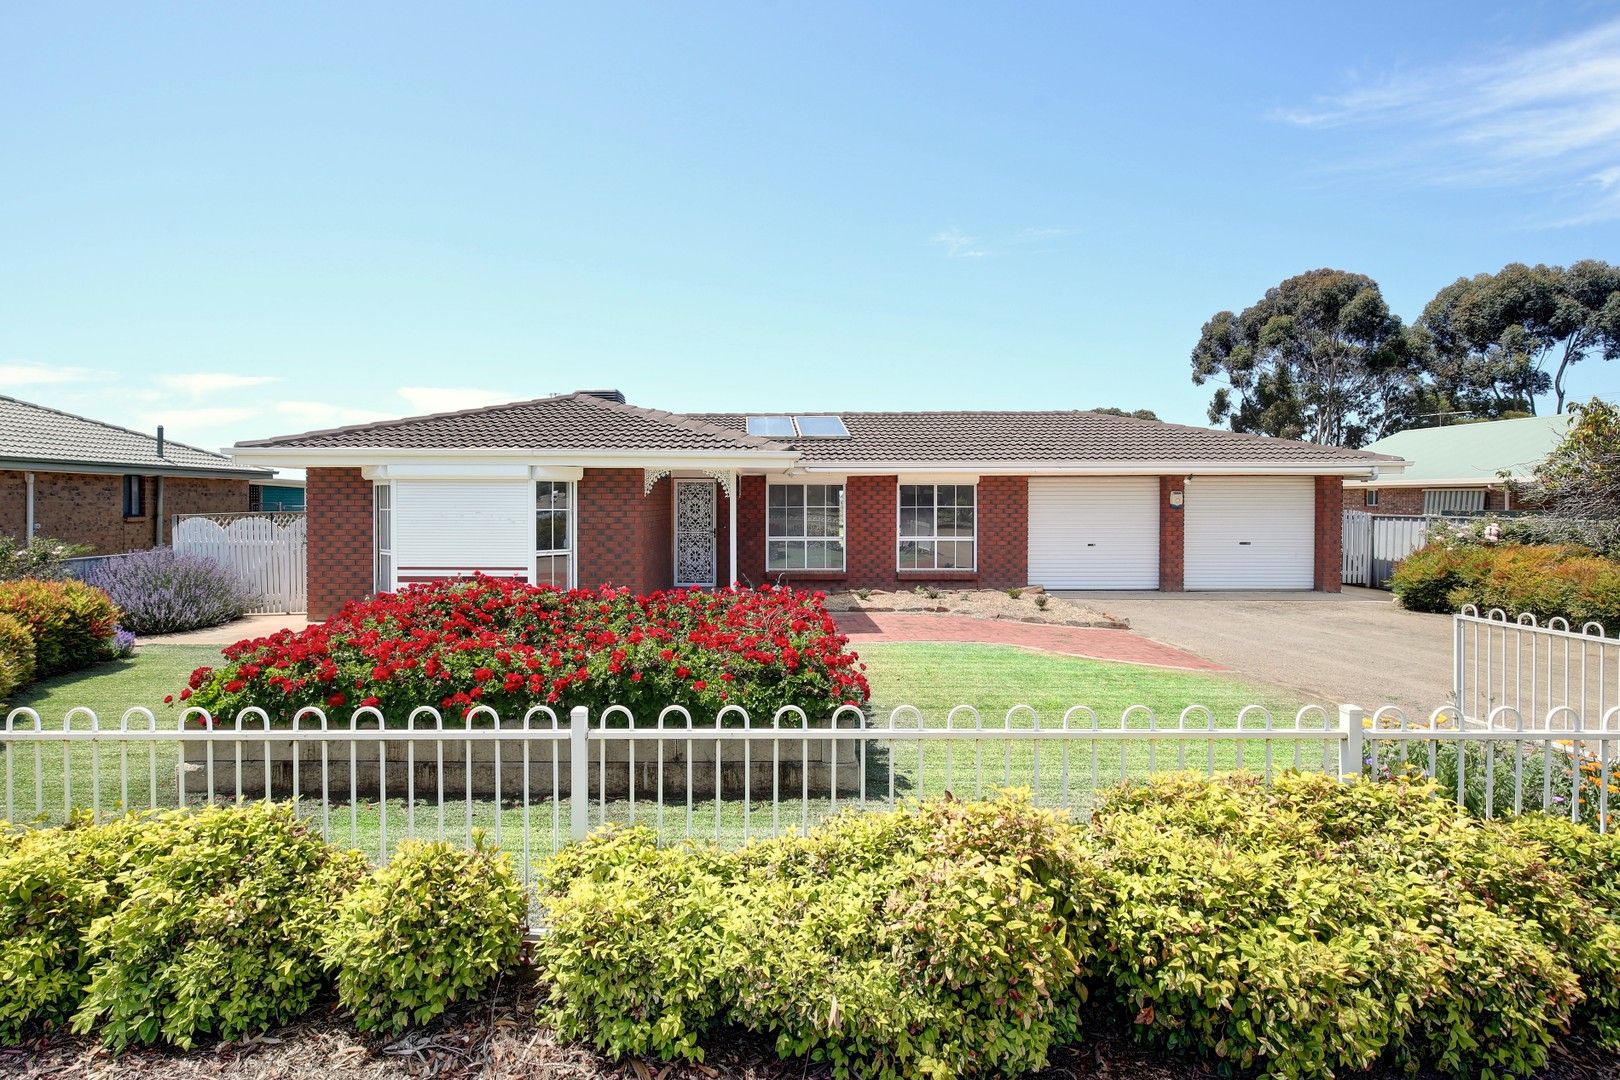 3 bedrooms House in 10 Bywaters Road MURRAY BRIDGE SA, 5253